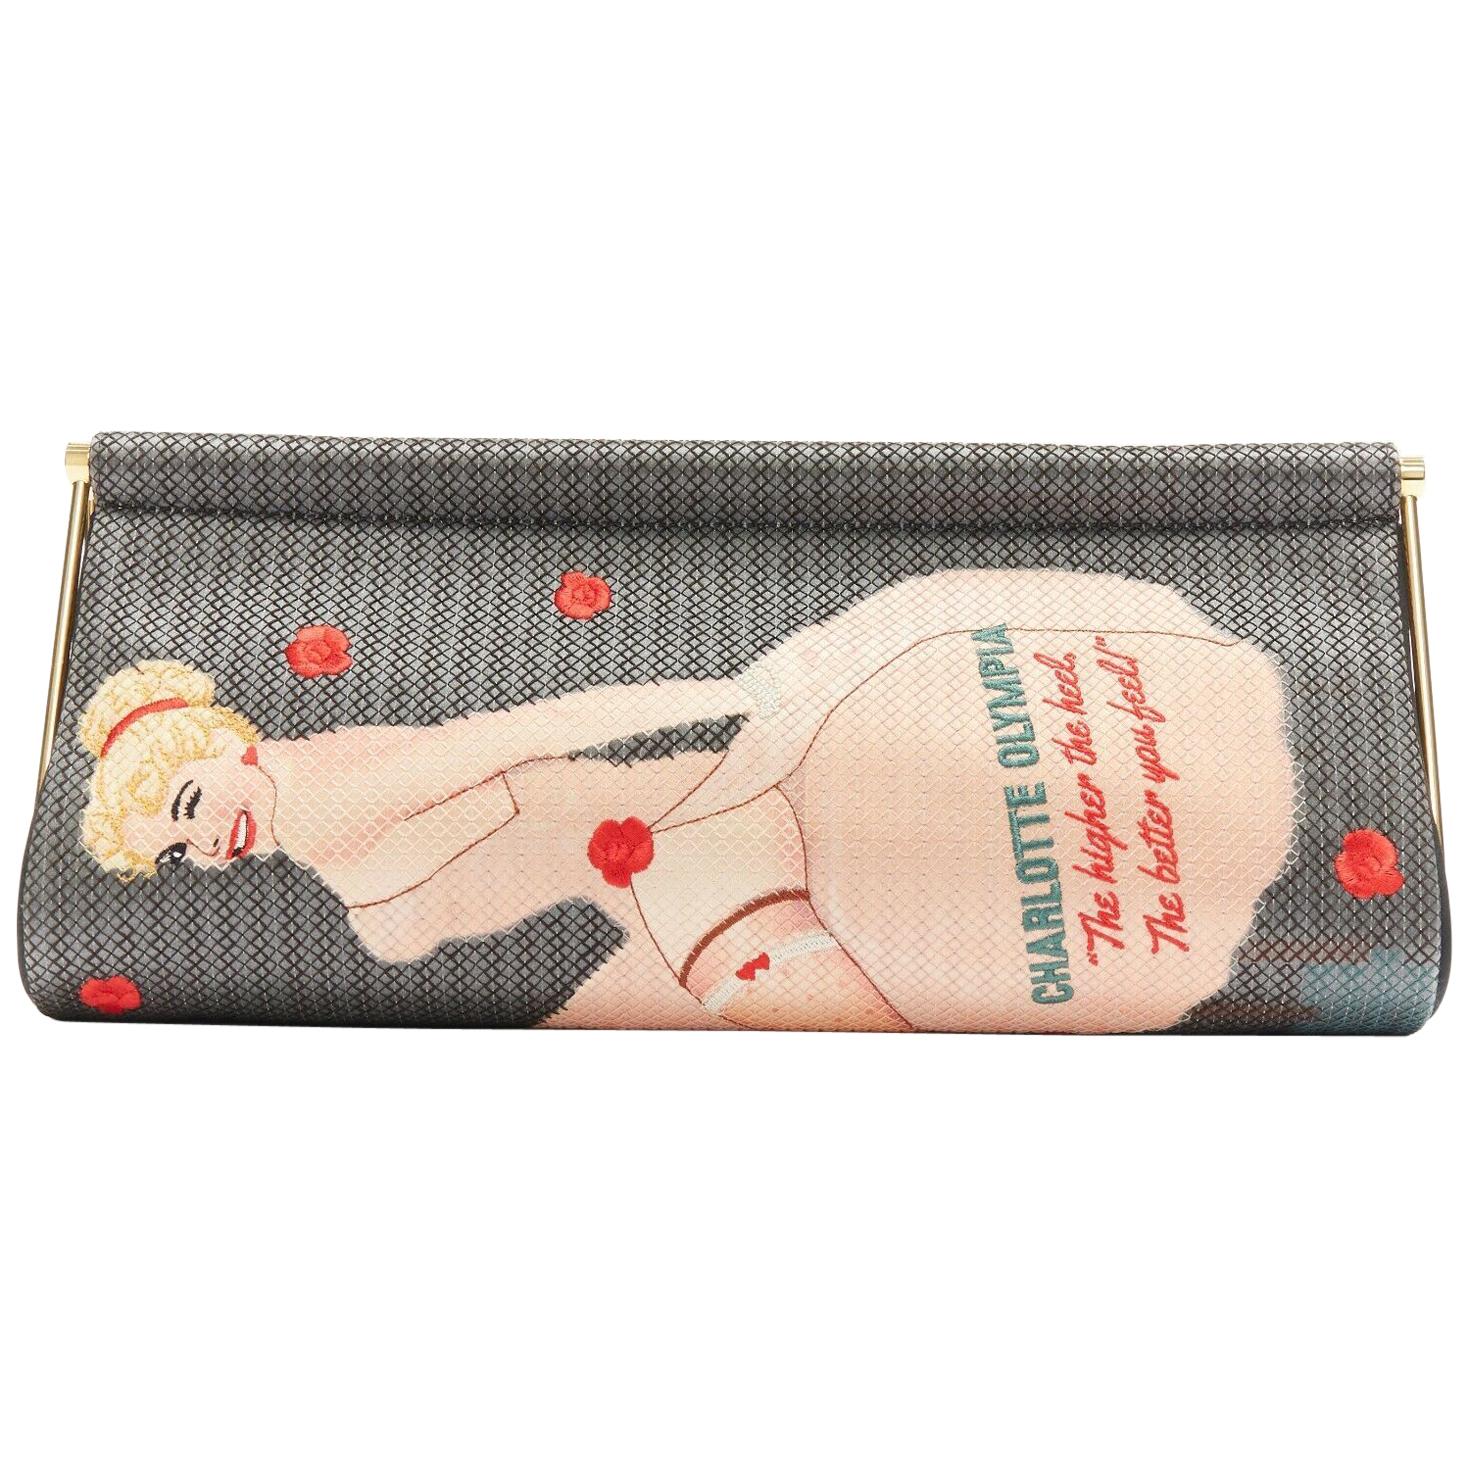 CHARLOTTE OLYMPIA Whisper grey nude pin up embroidered magazine clutch bag